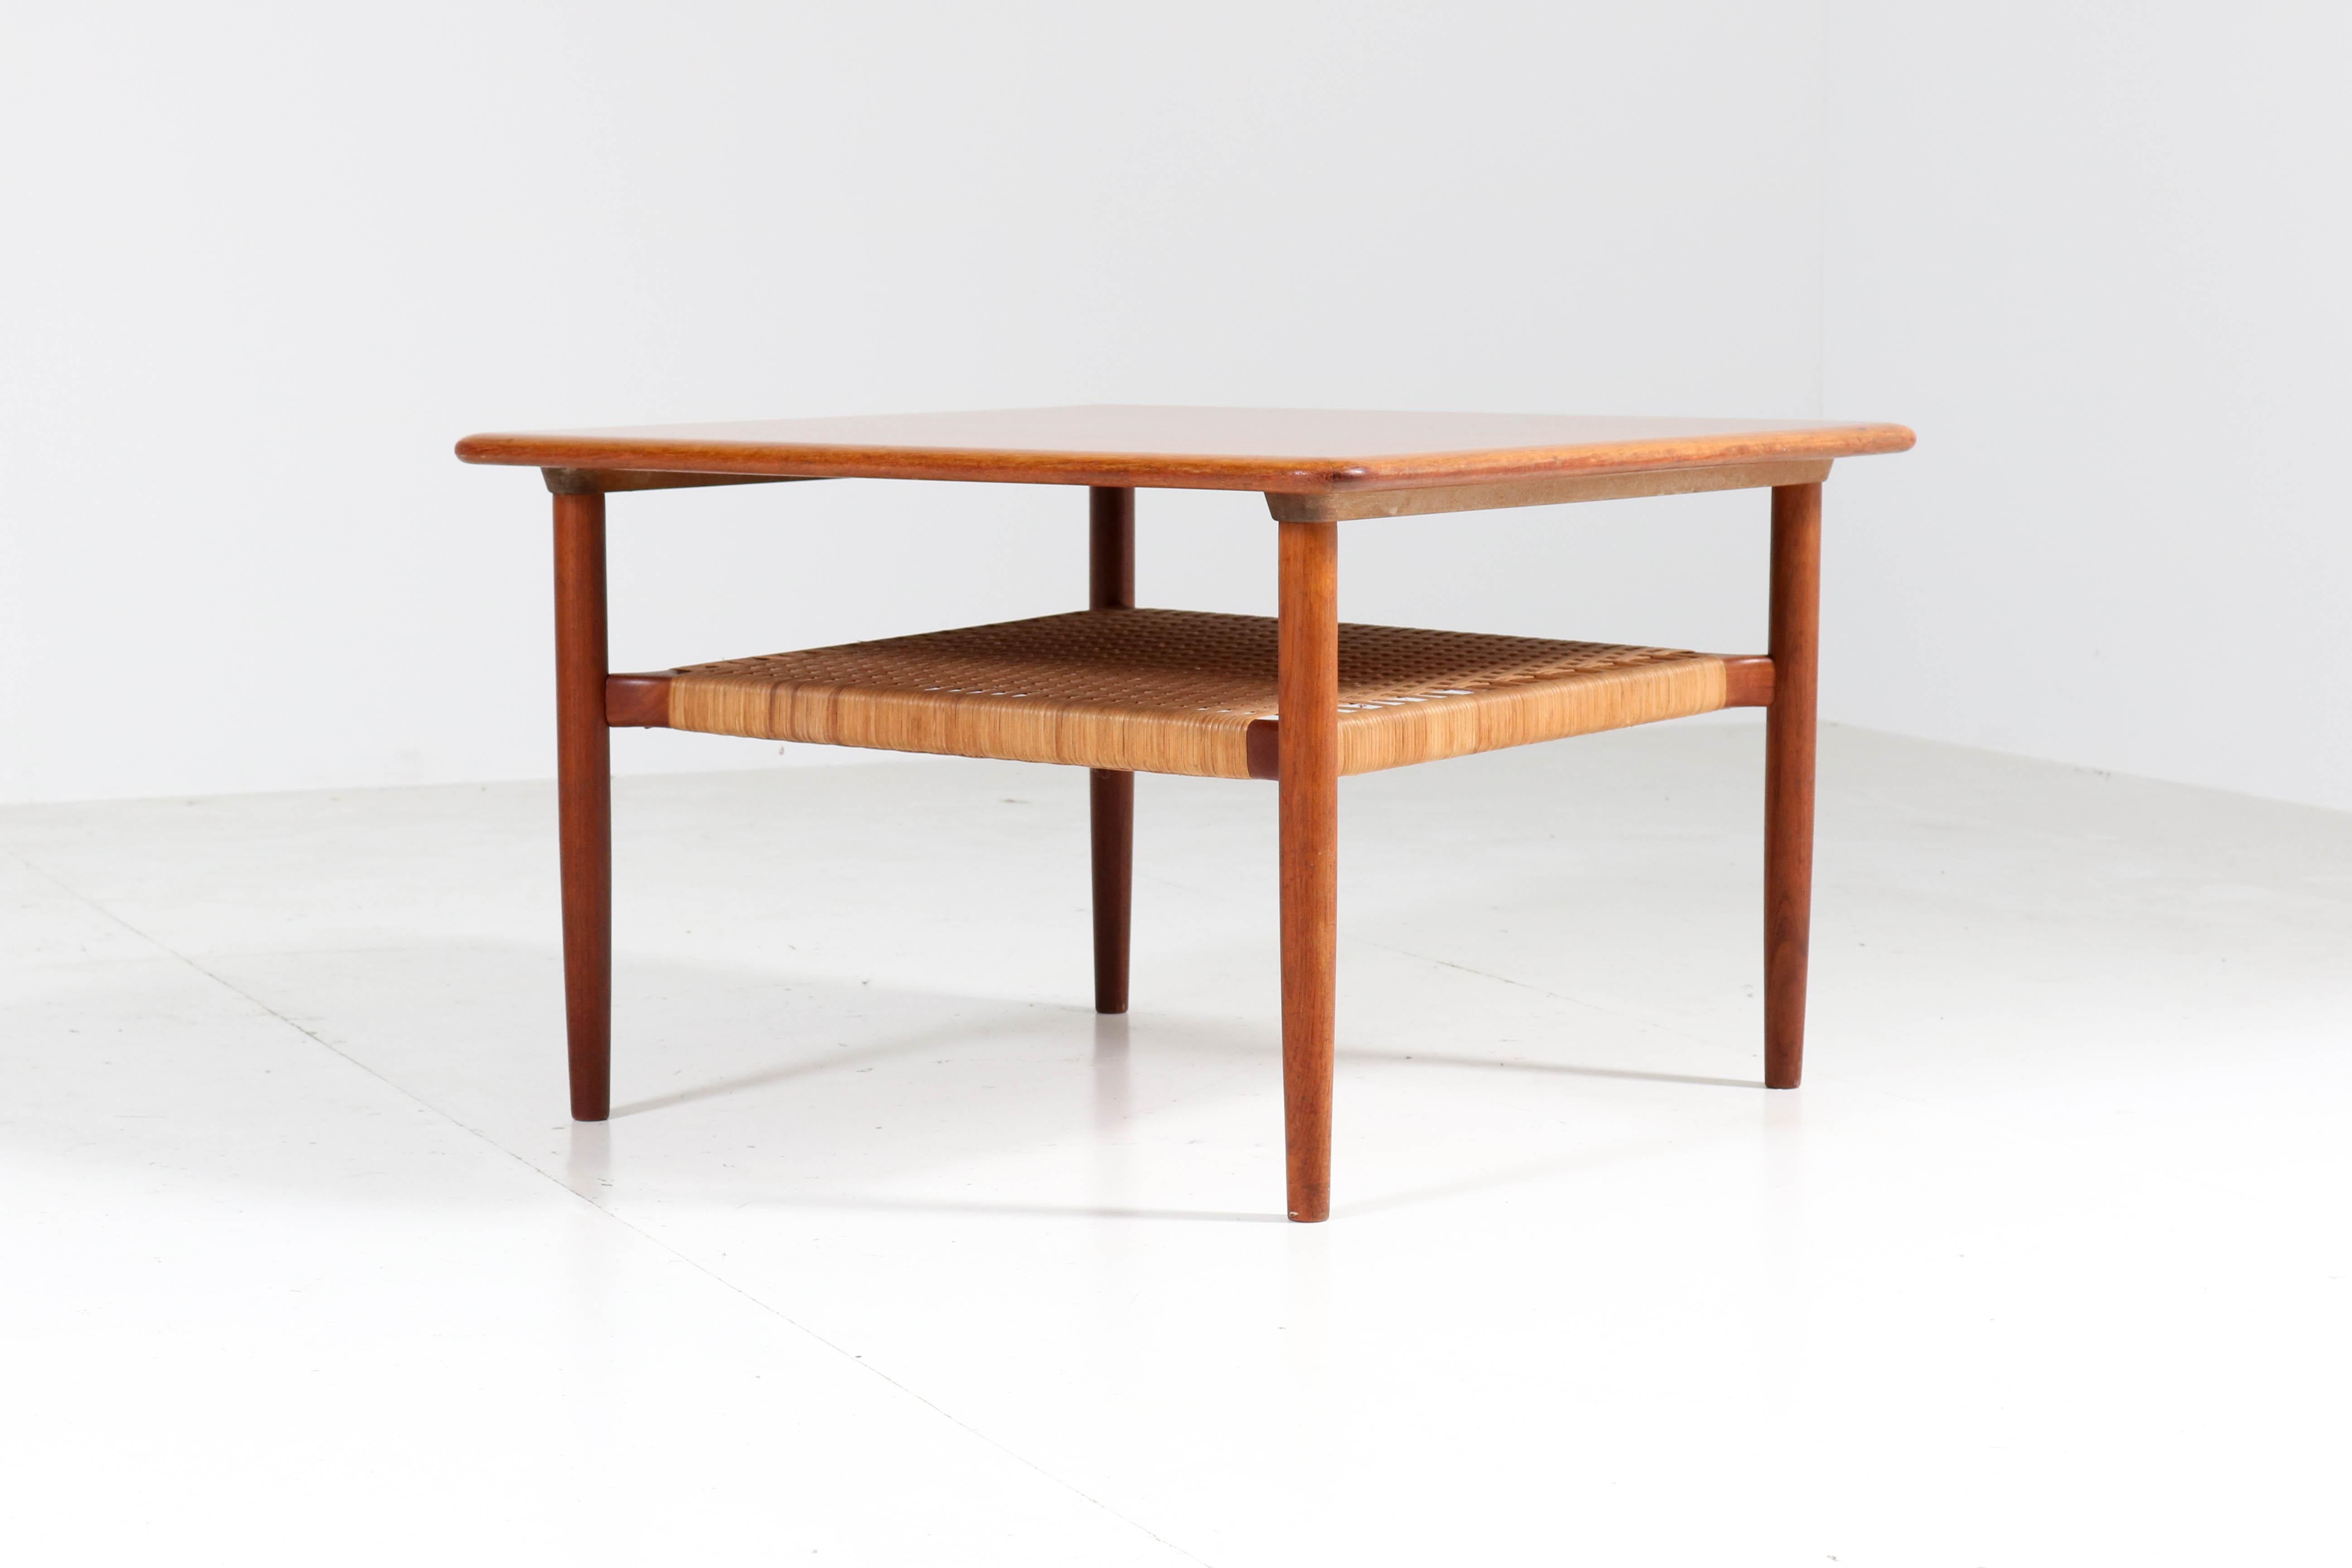 Wonderful Mid-Century Modern coffee table.
Design by Gunnar Schwartz.
Striking Danish design from the 1960s.
Solid teak with woven cane under shelf.
Marked with metal tag, see image.
In good original condition with minor wear consistent with